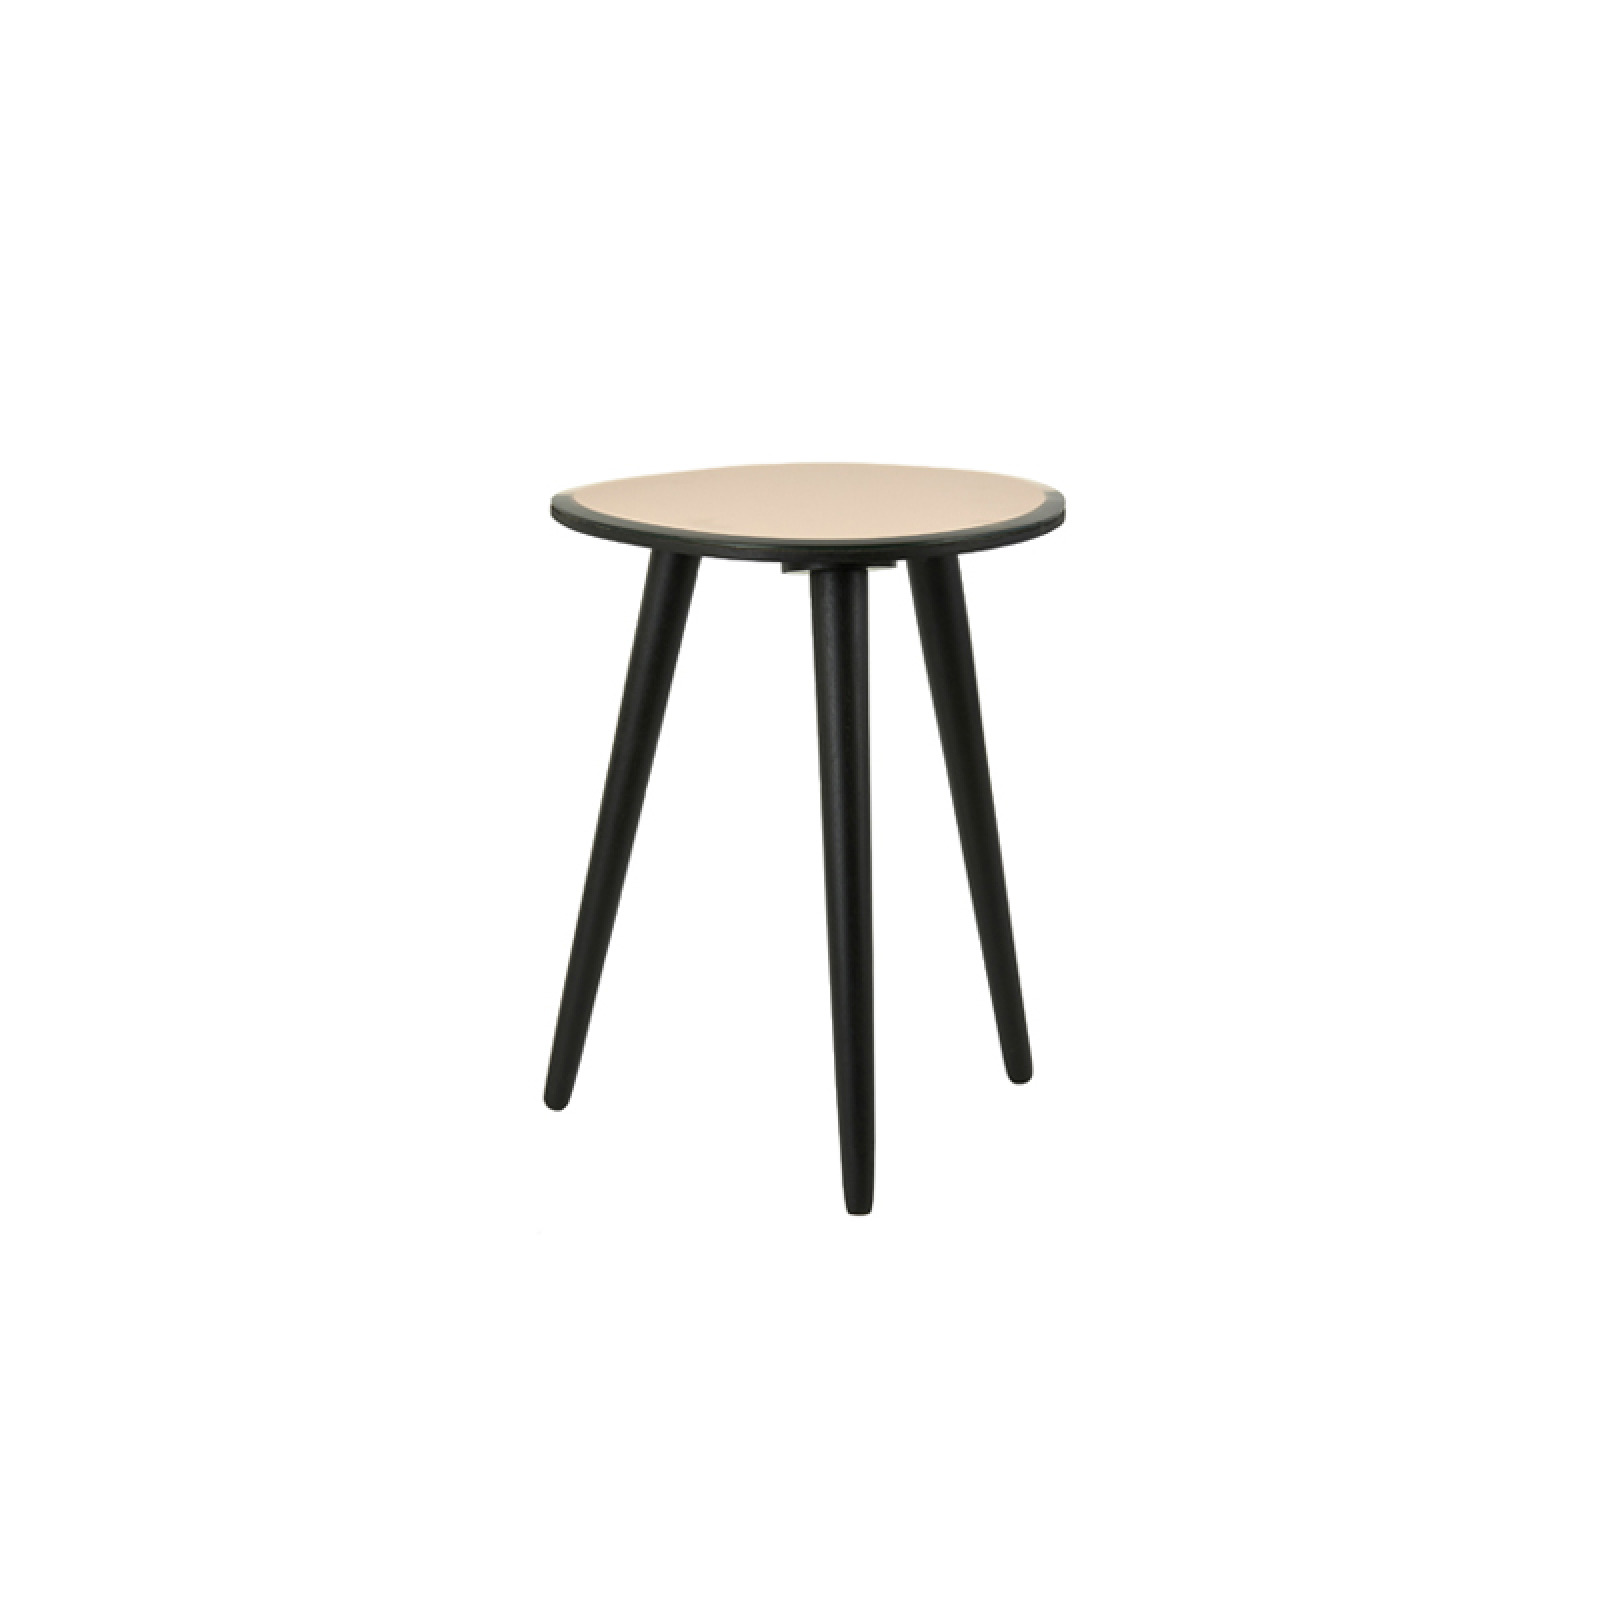 Divo side table